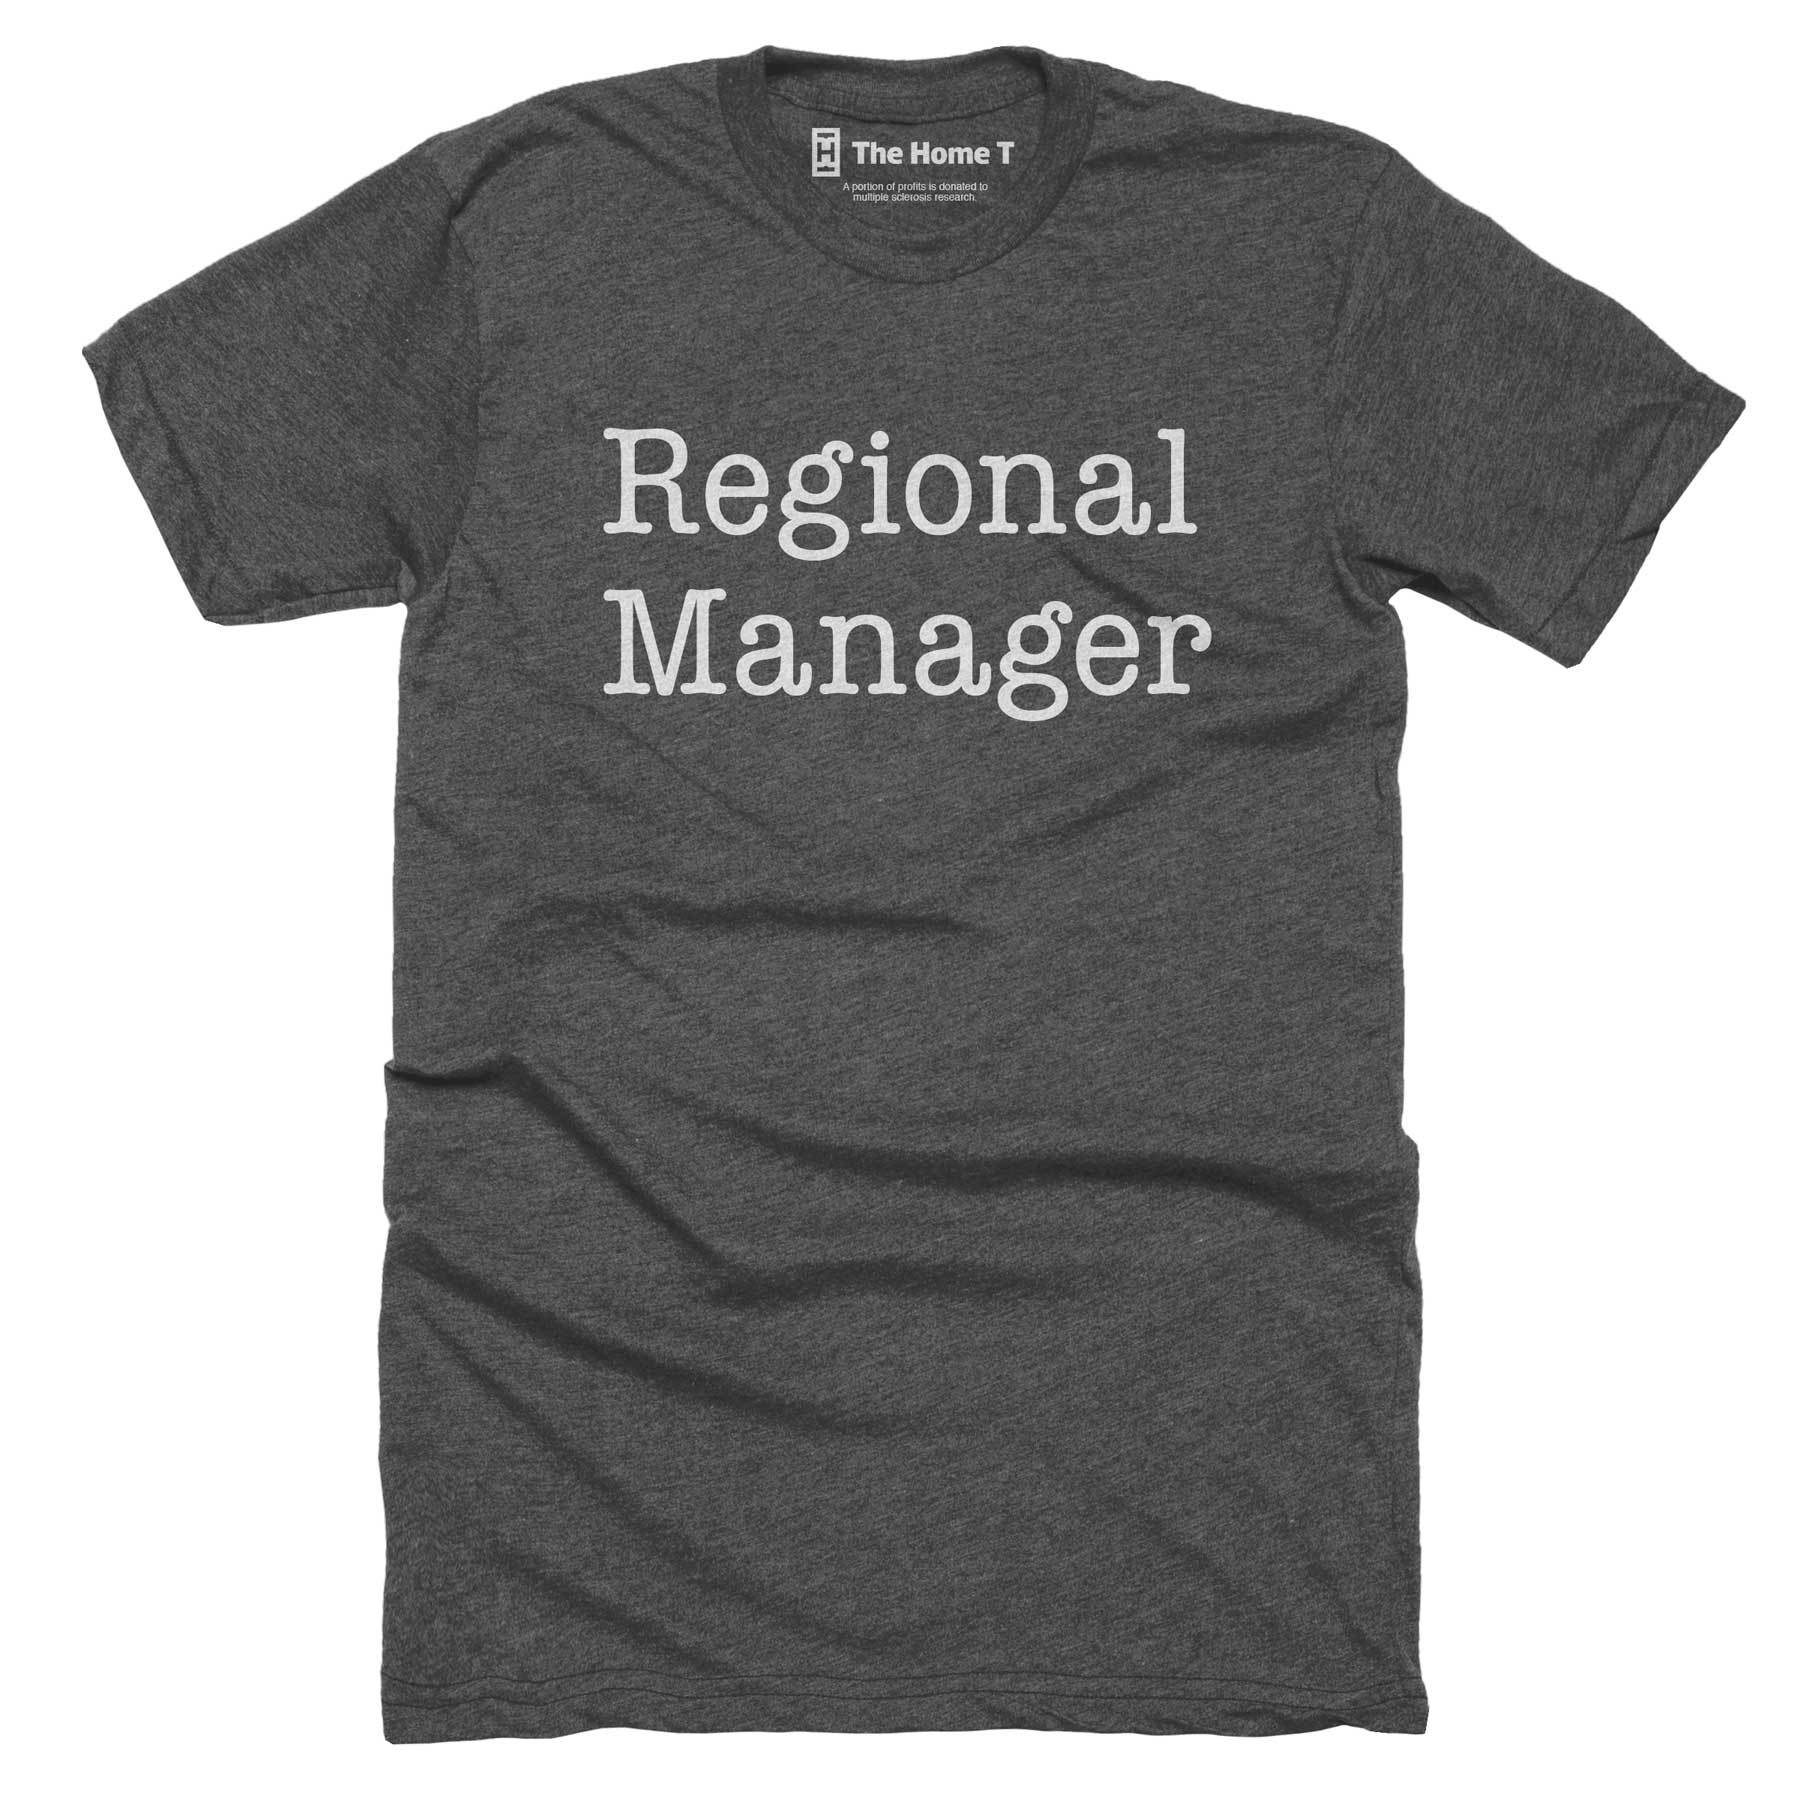 Regional Manager